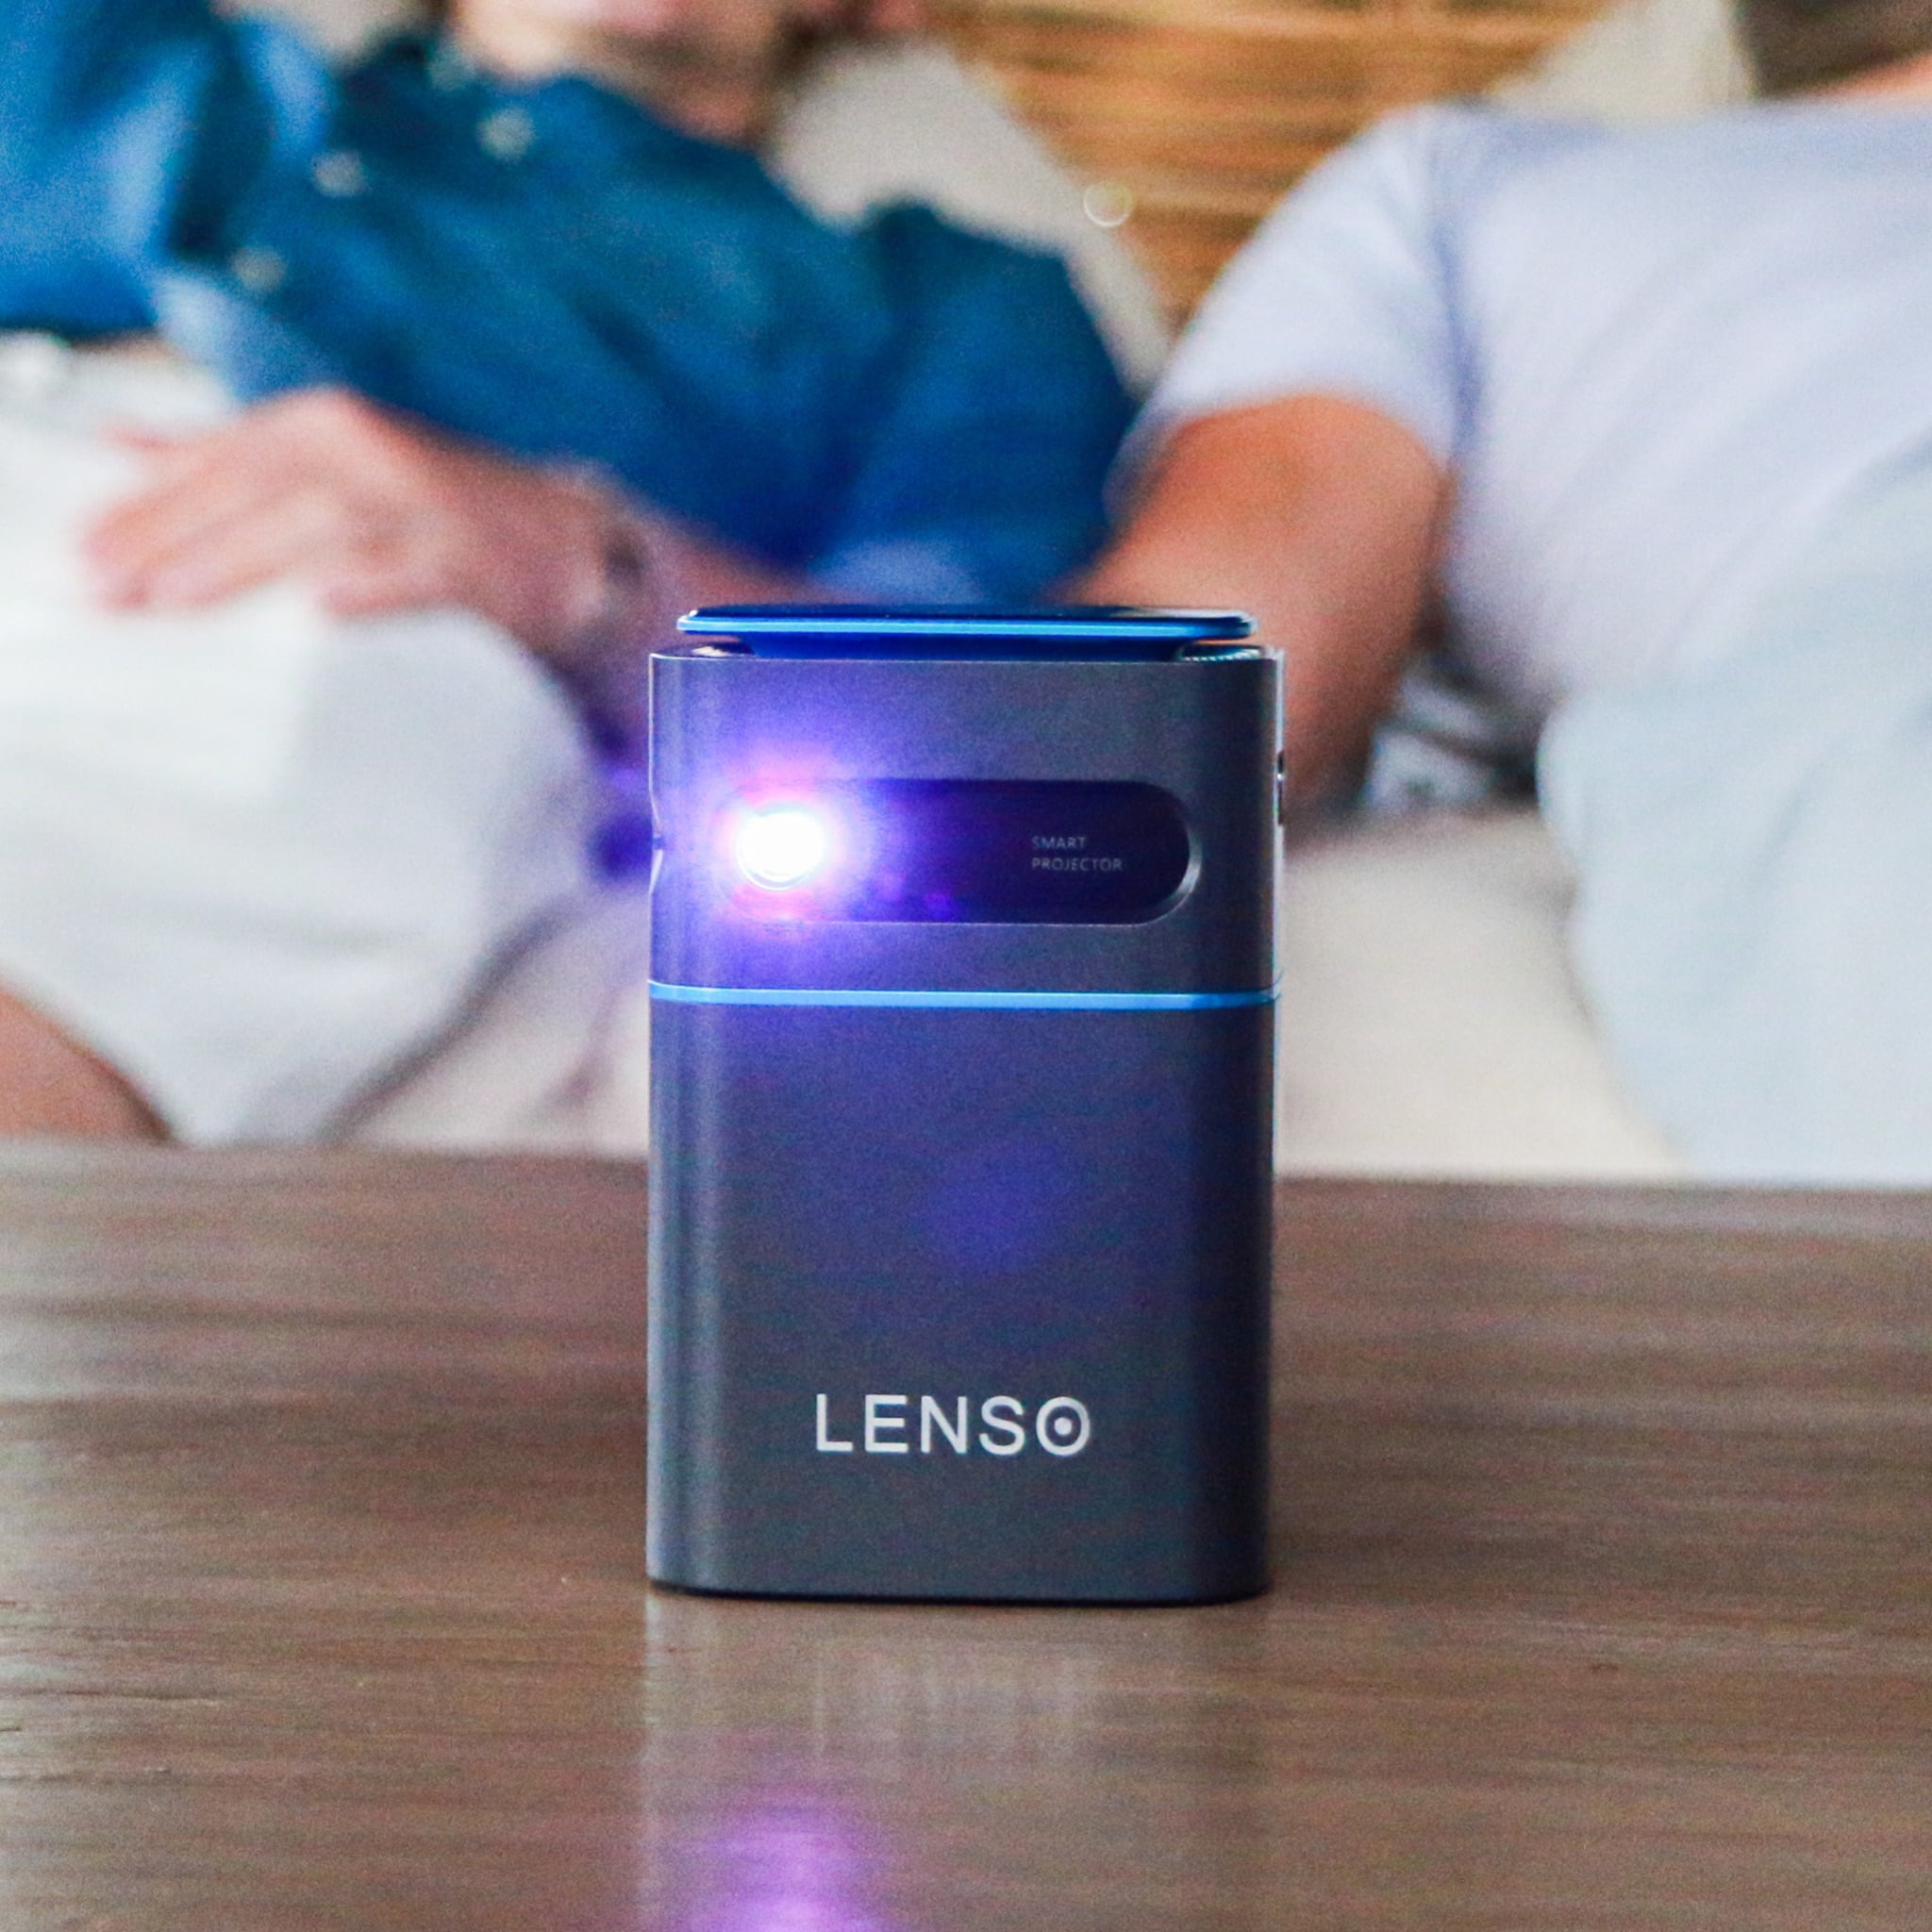 the front view of lenso see the perfect projector for movie night